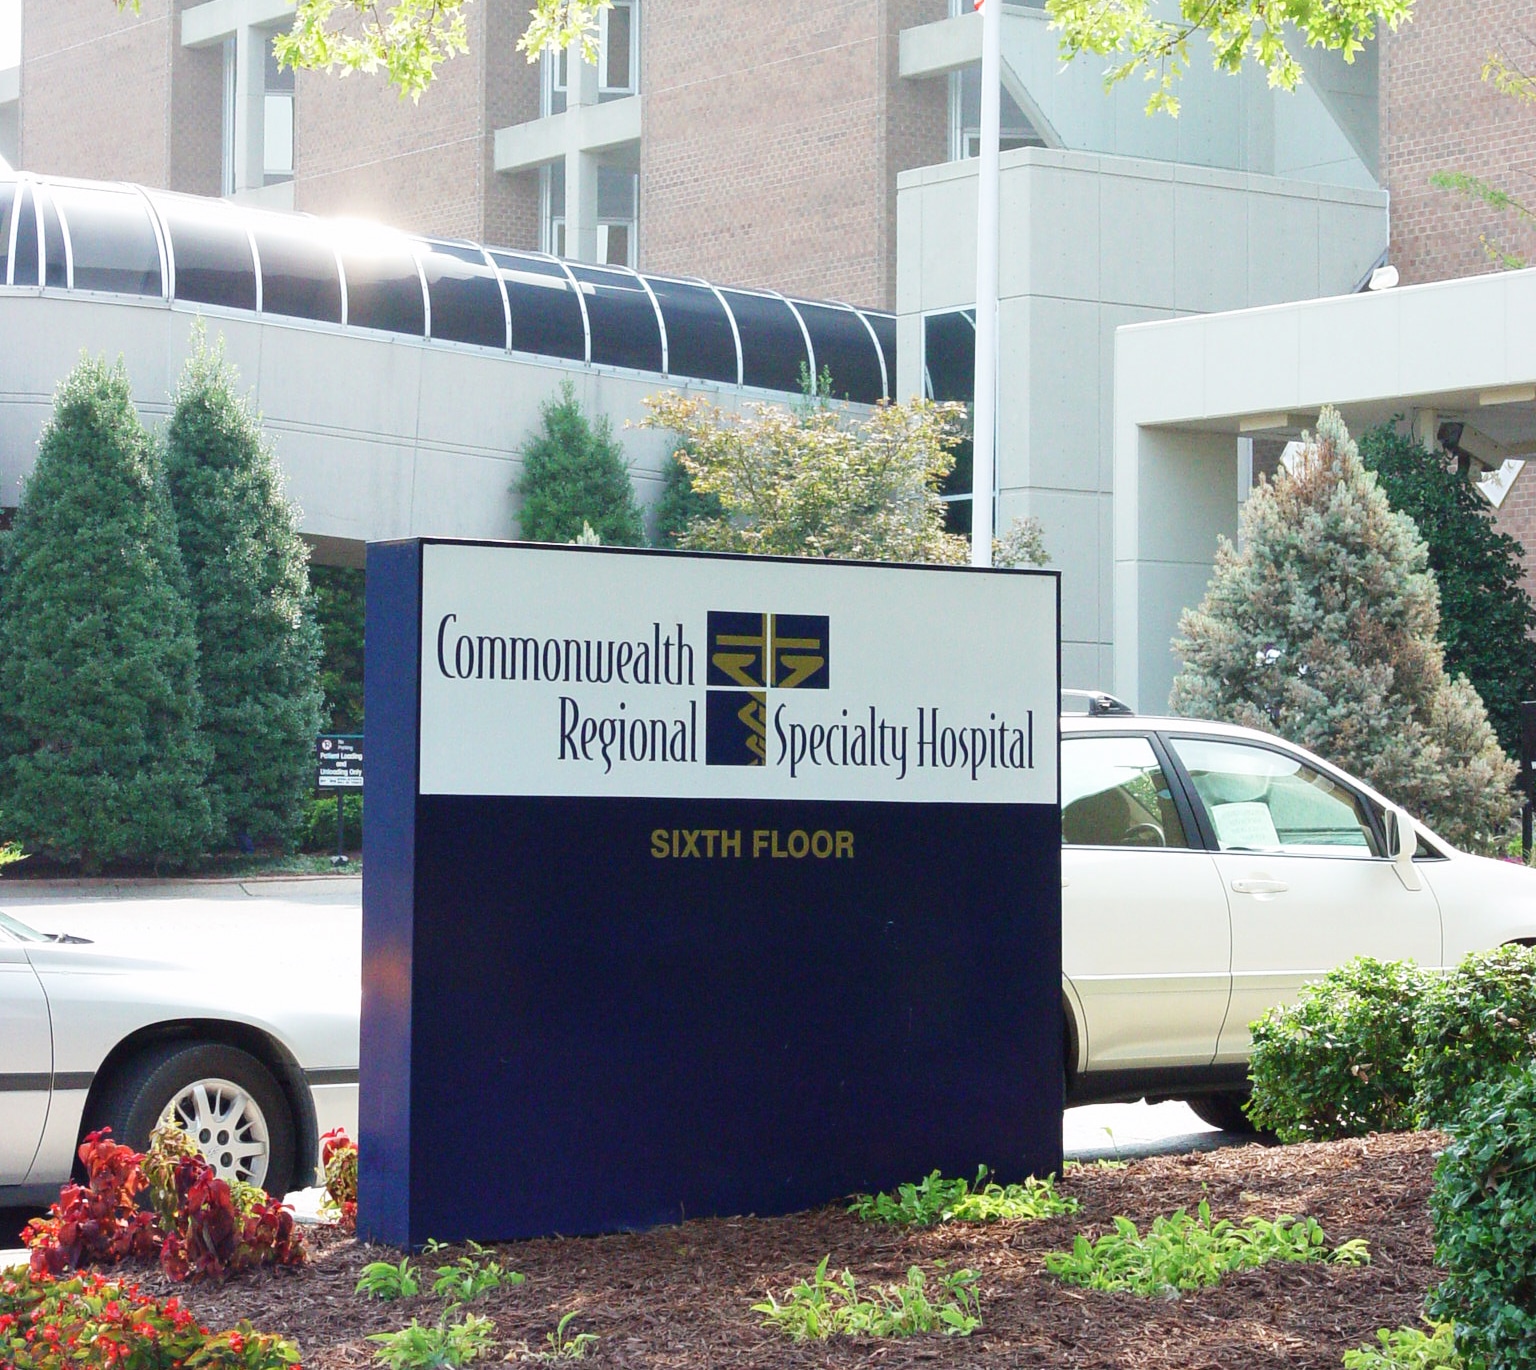 Exterior view of the Commonwealth Regional Specialty Hospital sign.